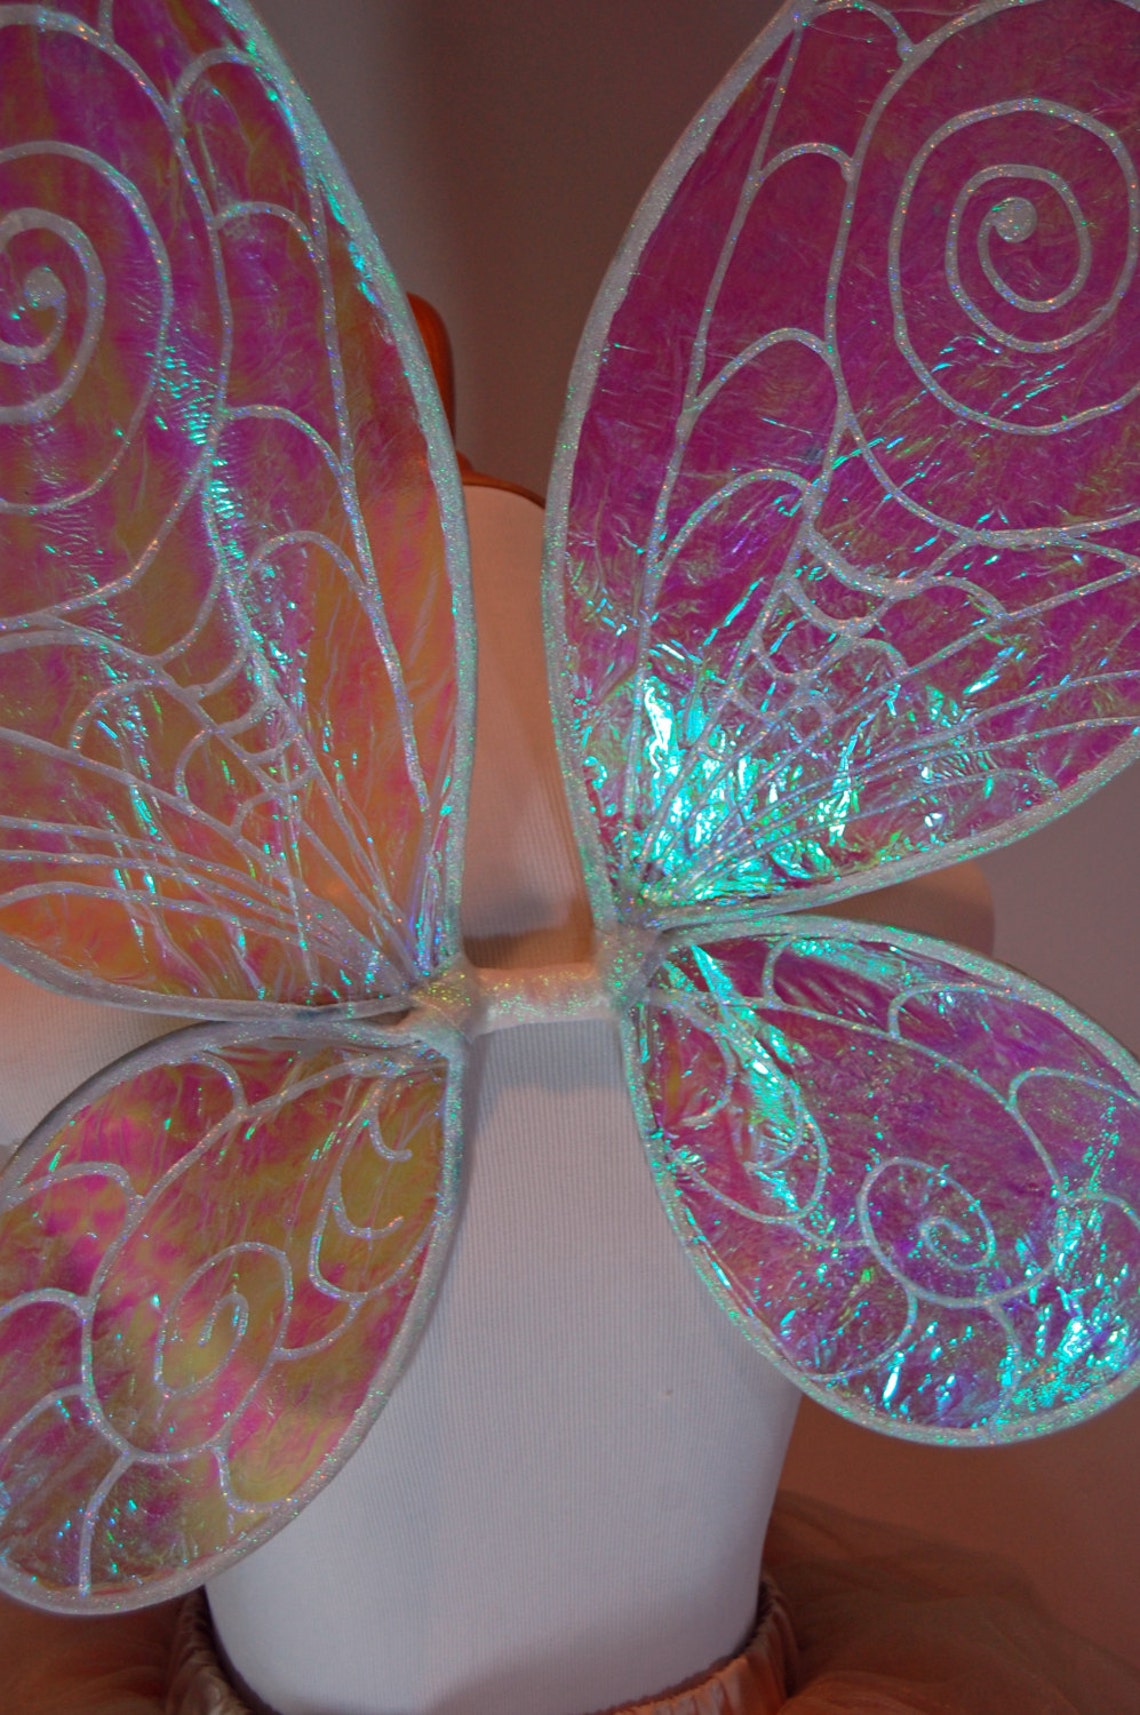 Tinkerbell or Periwinkle Fairy Wings Clear iridescent color | Etsy